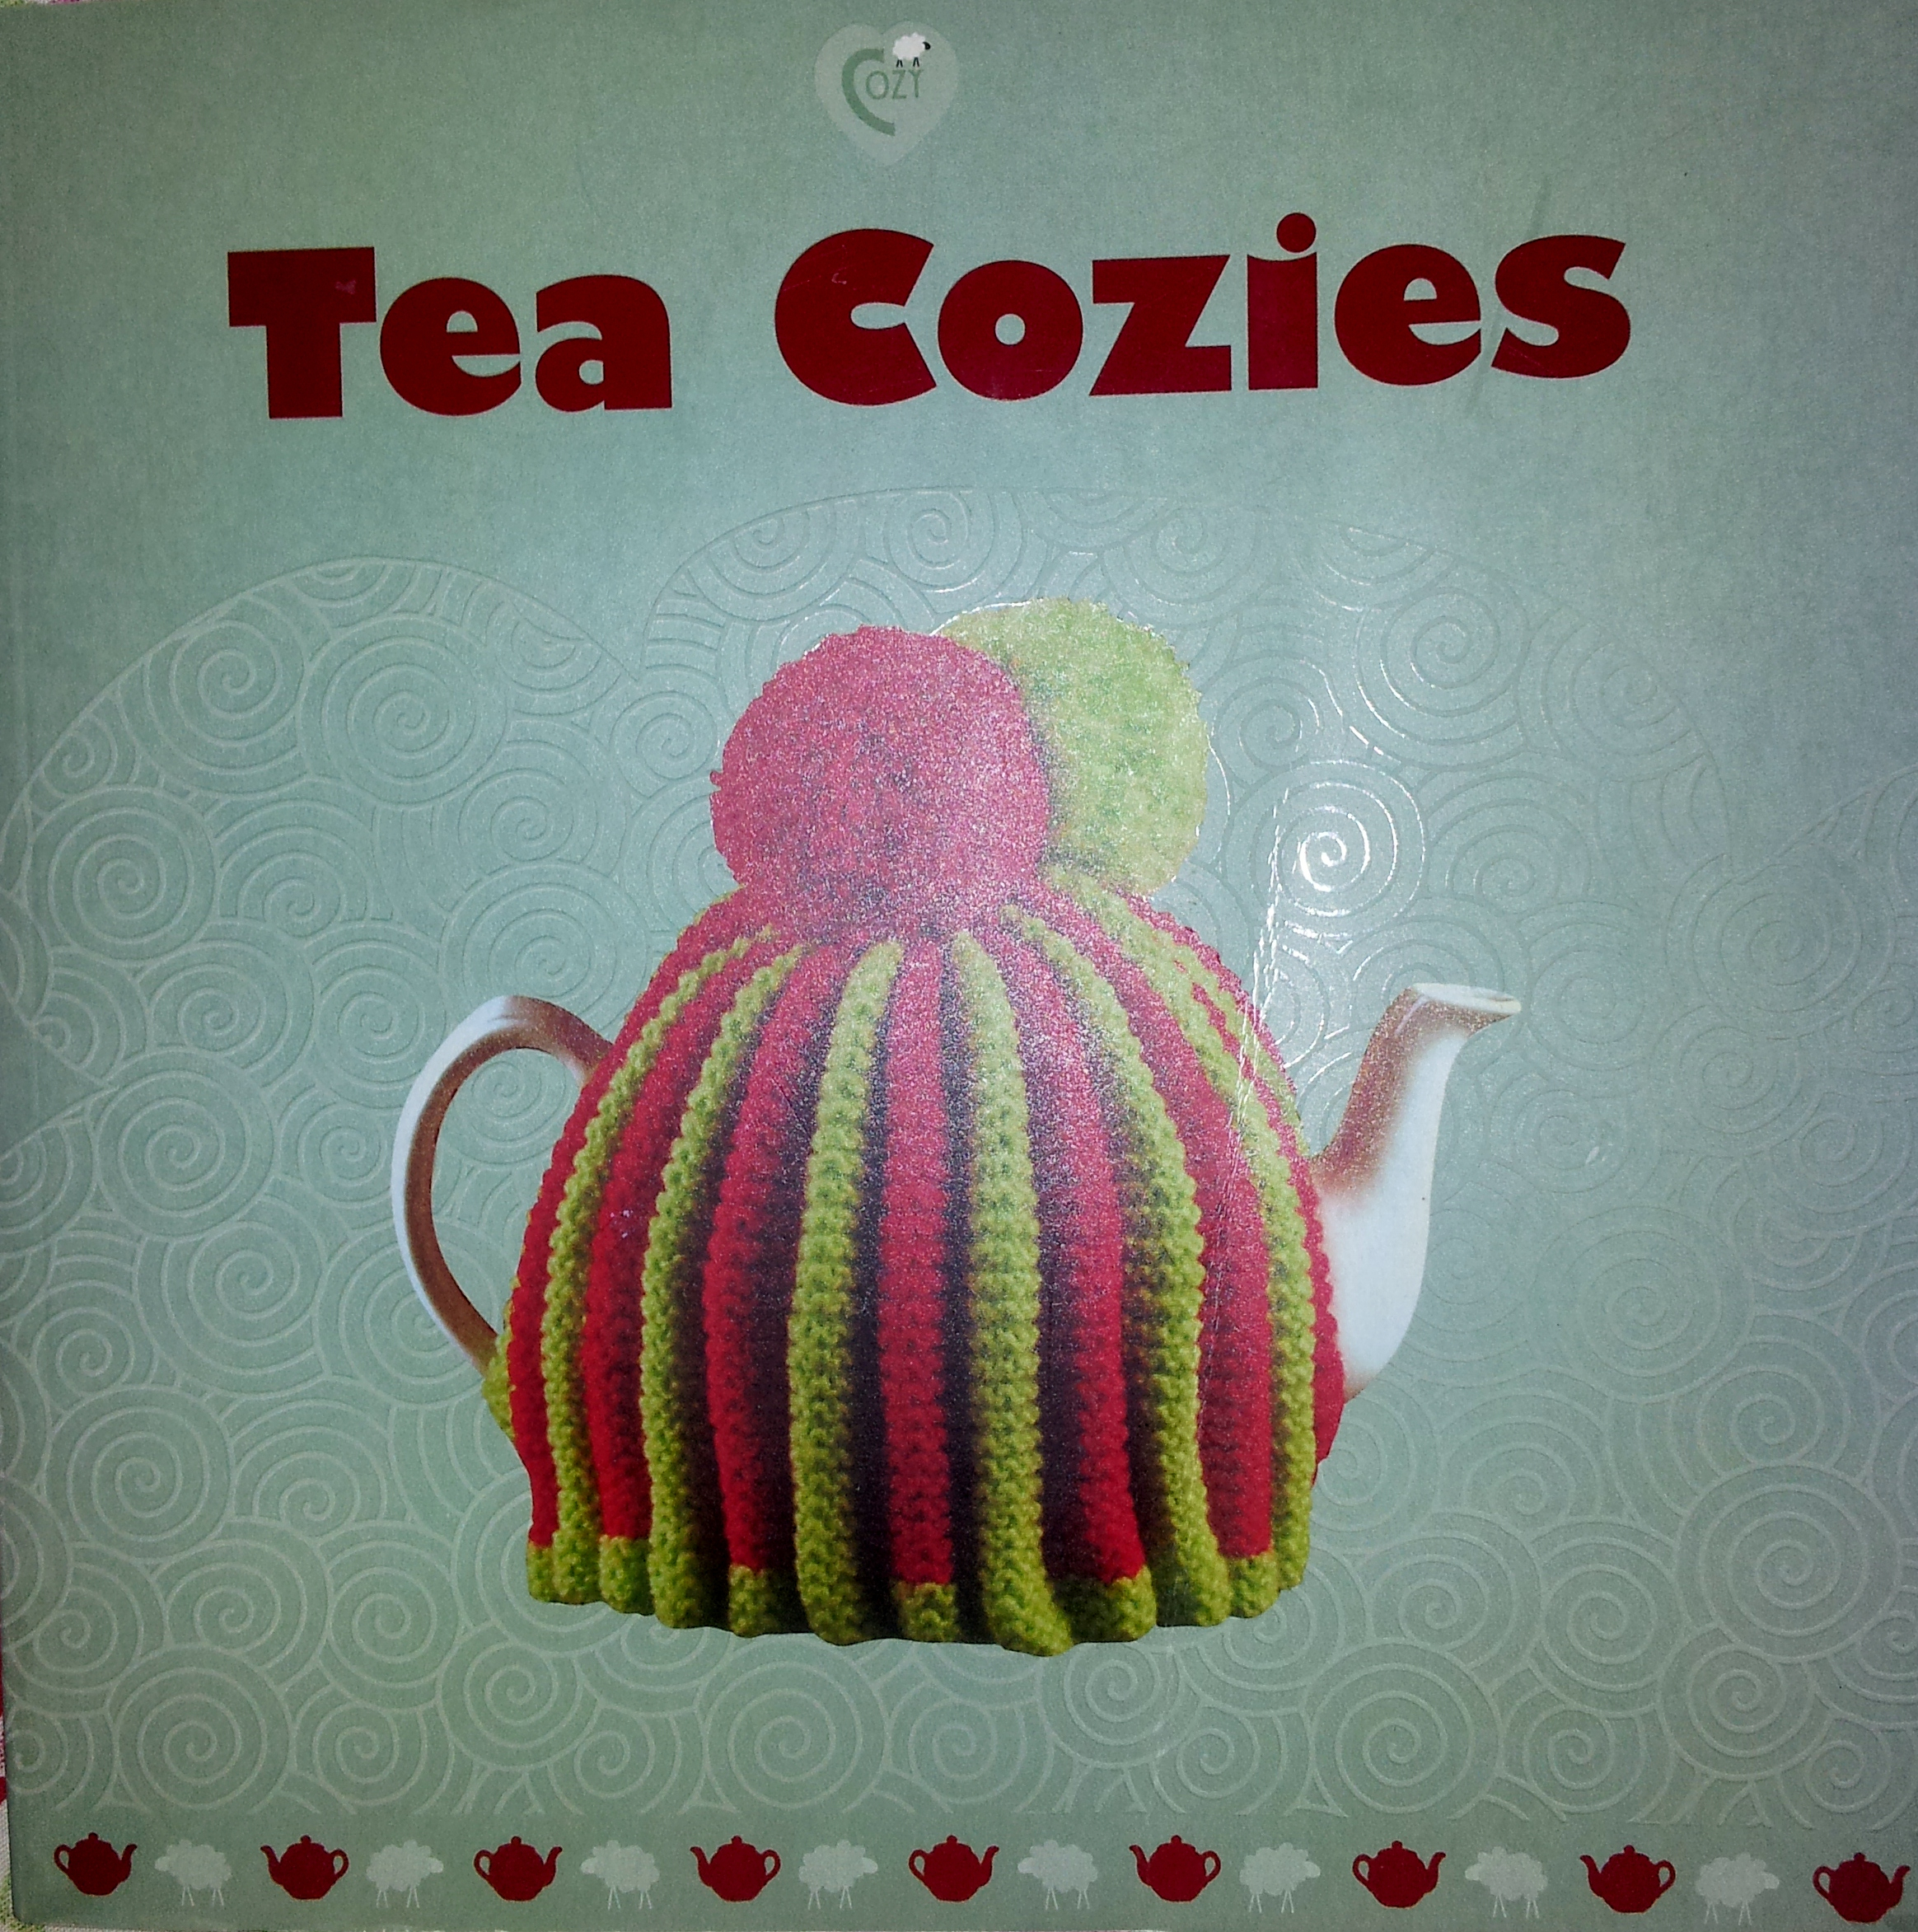 Tea Cosy Knitting Patterns Easy My Vintage Style Knitted Tea Cosy Cozy Thestitchsharer